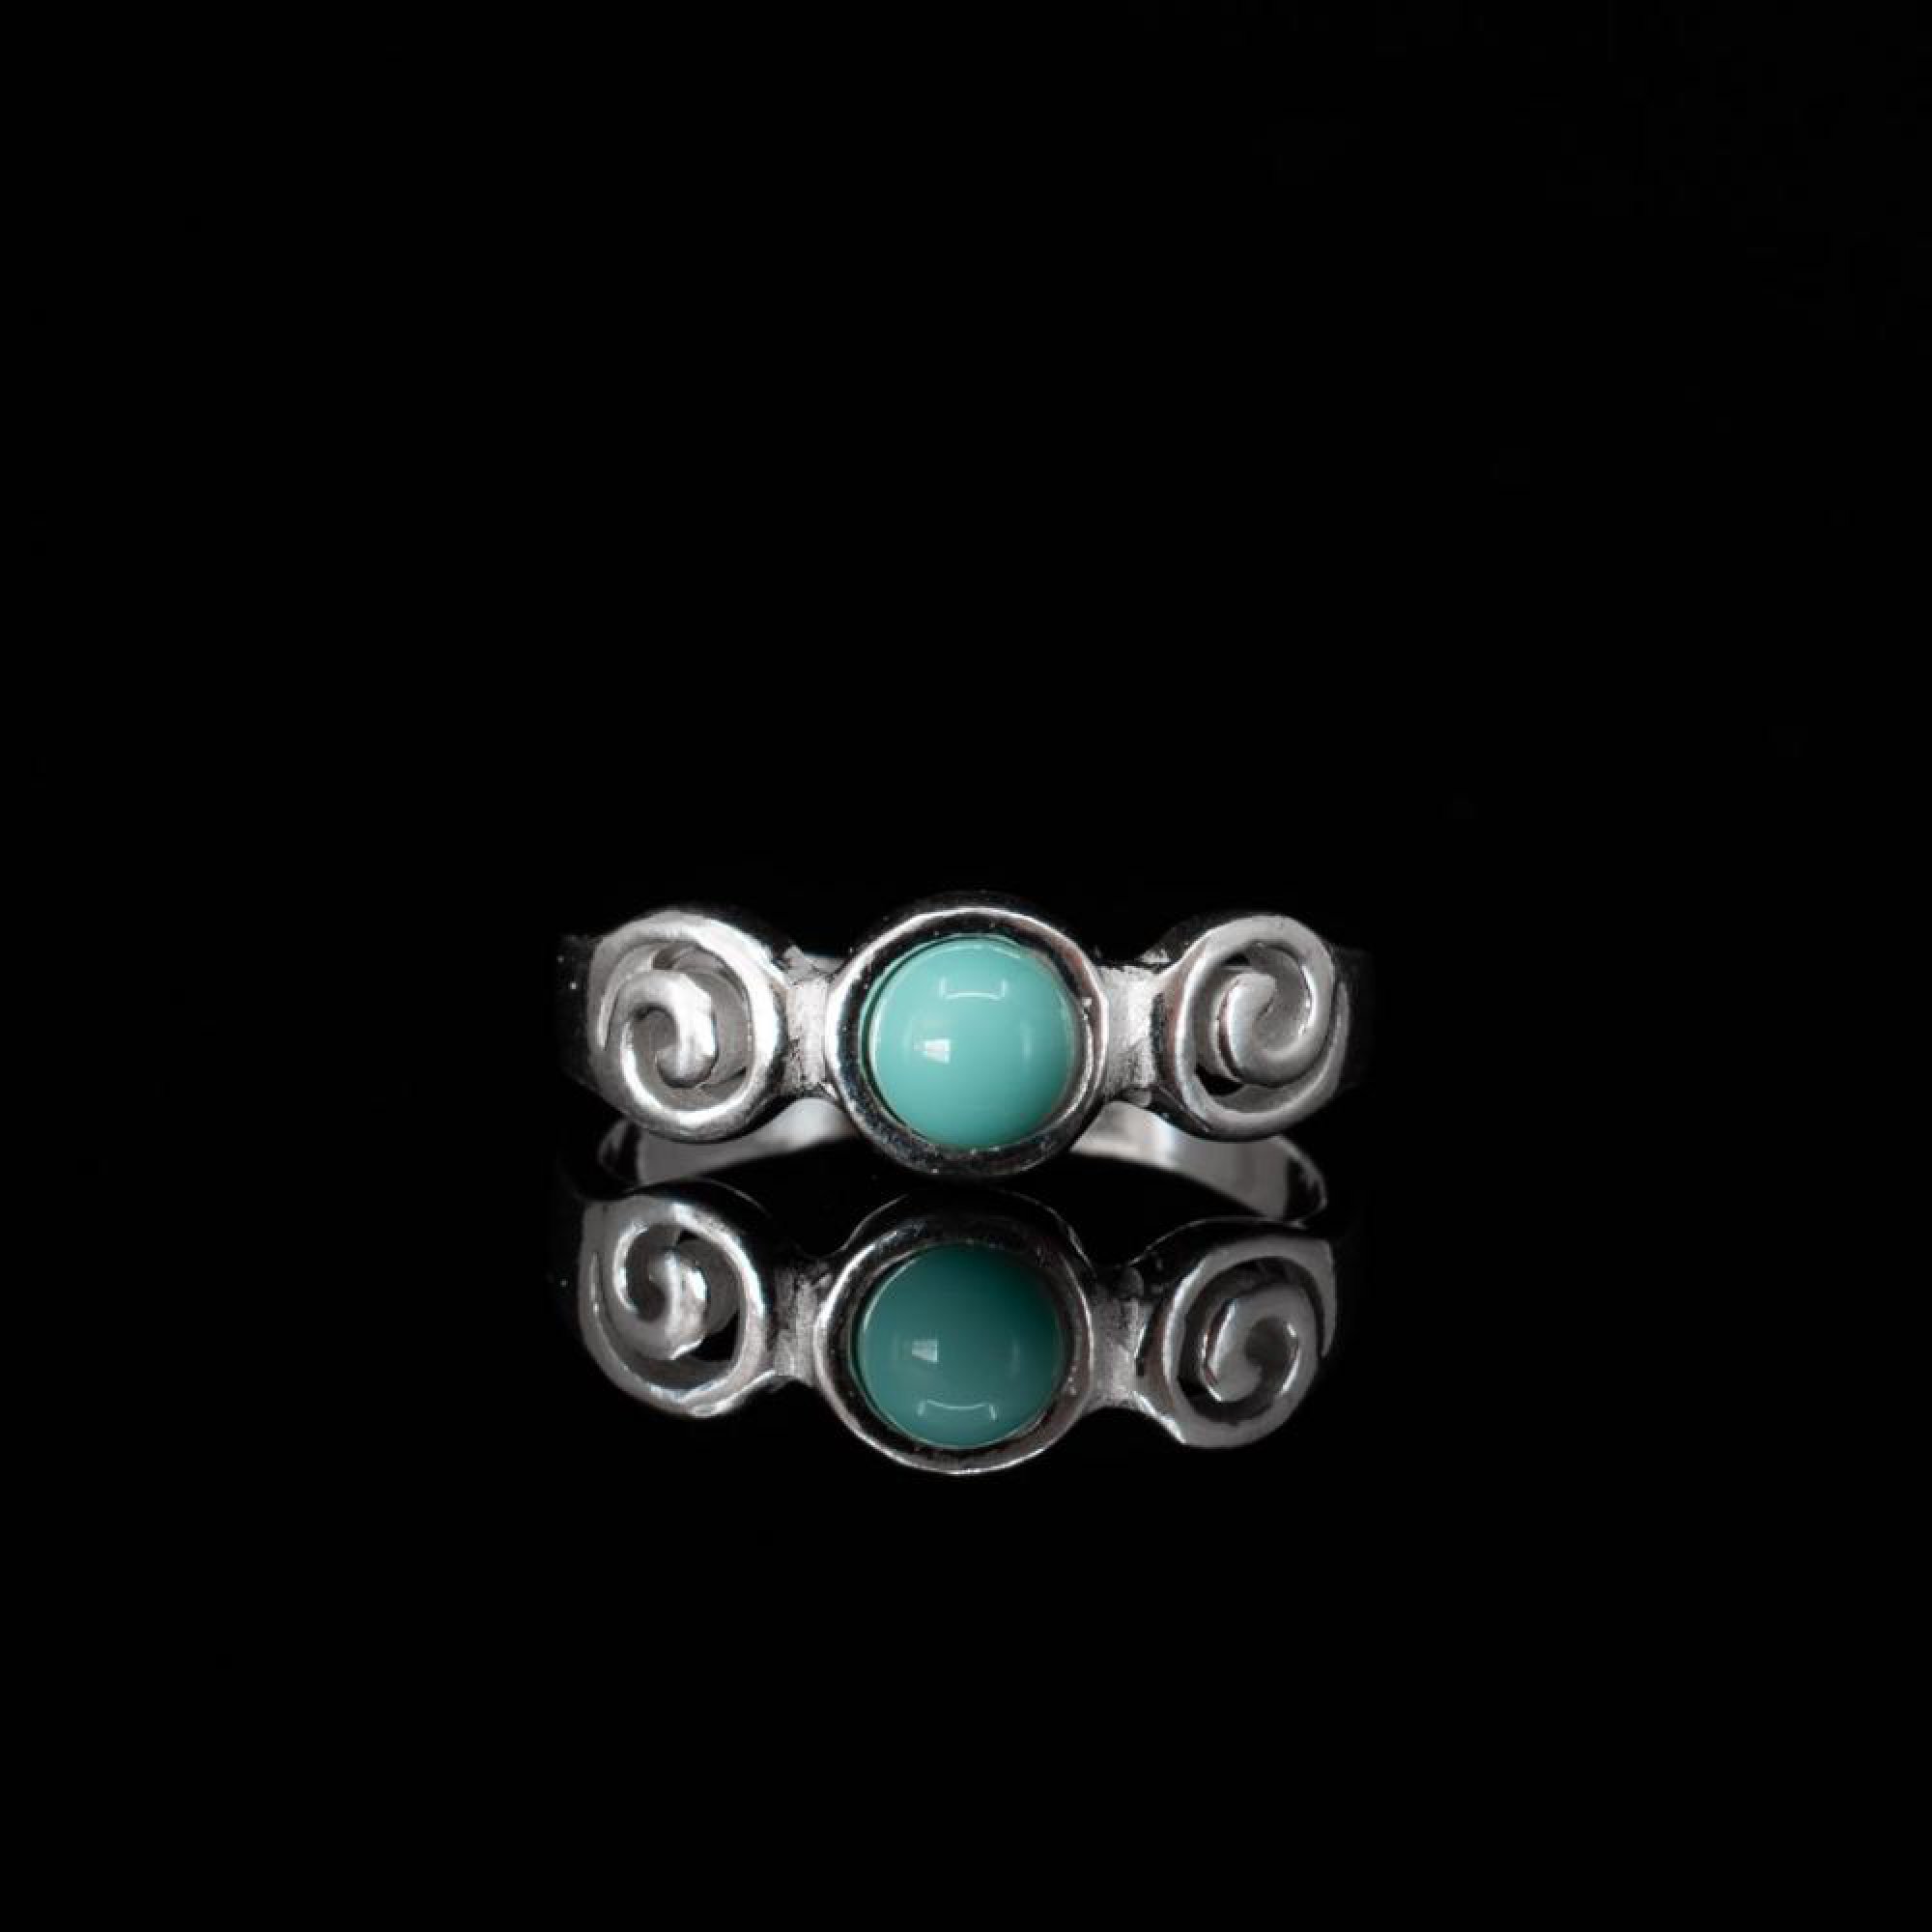 Meander ring with turquoise stone